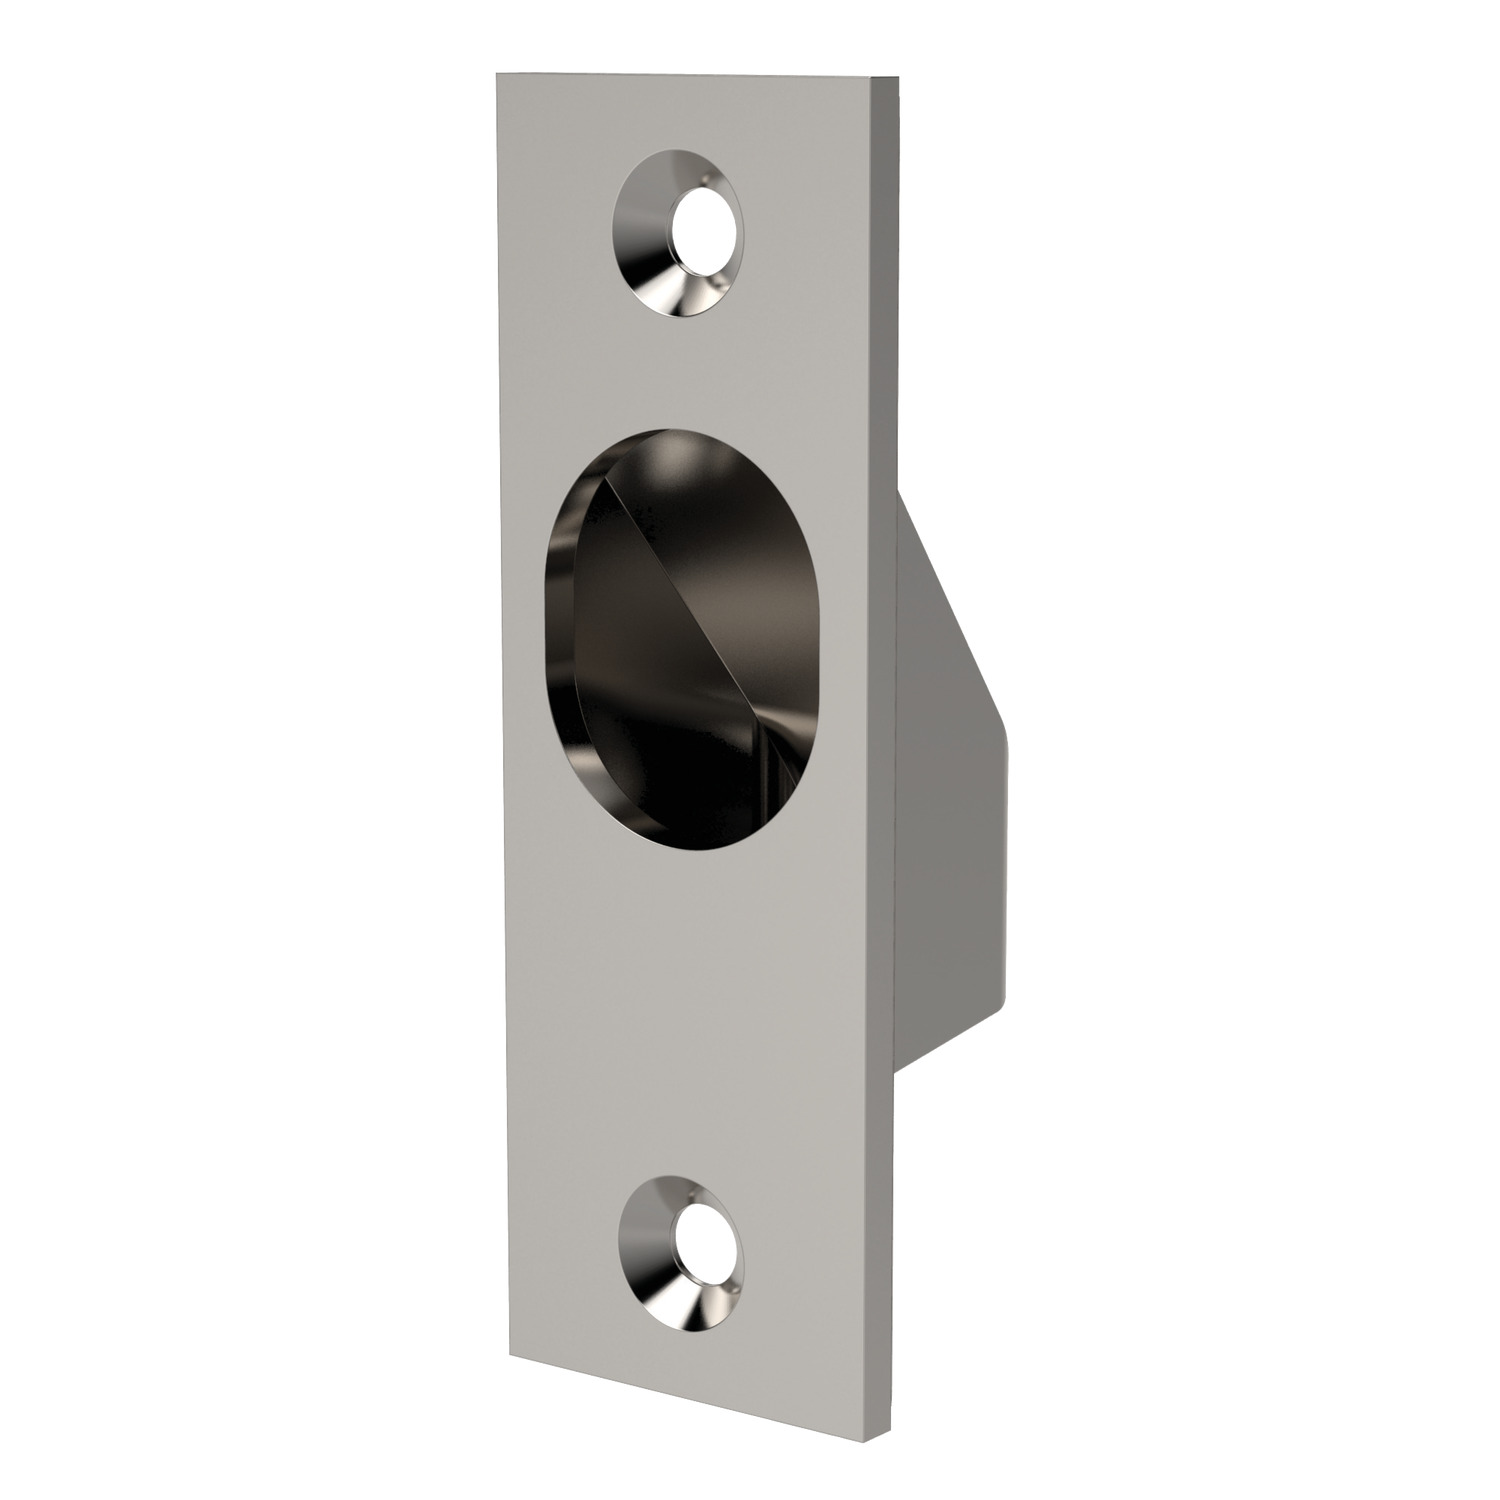 Finger Pulls, Recessed Recessed pulls, recessed finger pulls come in stainless steel, profiled aluminium, thermoplastic etc. Designed for easy installing in panels, doors and enclosures etc.